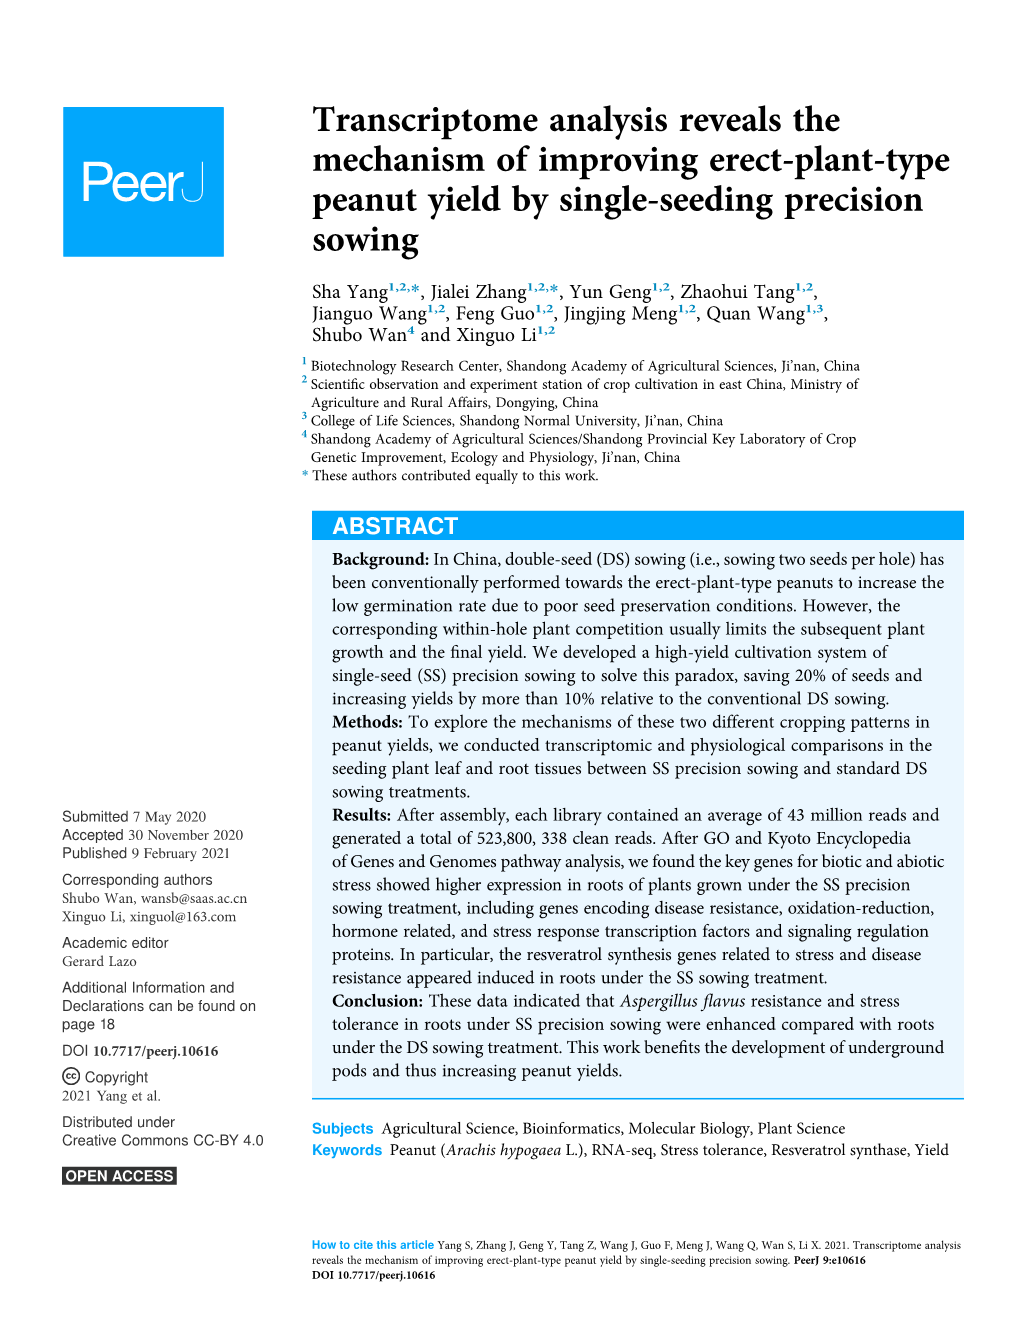 Transcriptome Analysis Reveals the Mechanism of Improving Erect-Plant-Type Peanut Yield by Single-Seeding Precision Sowing